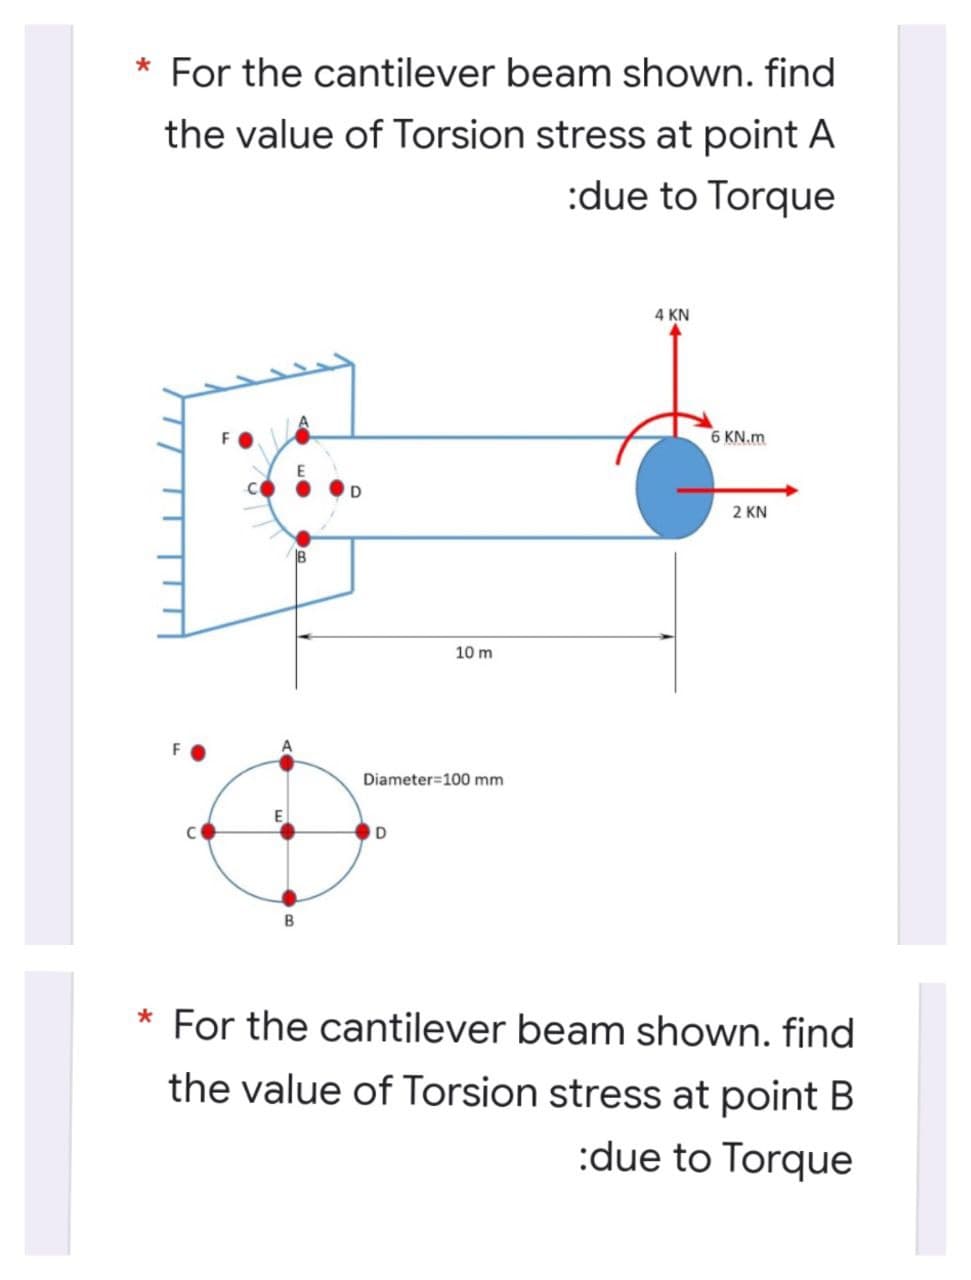 * For the cantilever beam shown. find
the value of Torsion stress at point A
:due to Torque
4 KN
6 KN.m
2 KN
10 m
Diameter=100 mm
For the cantilever beam shown. find
the value of Torsion stress at point B
:due to Torque
